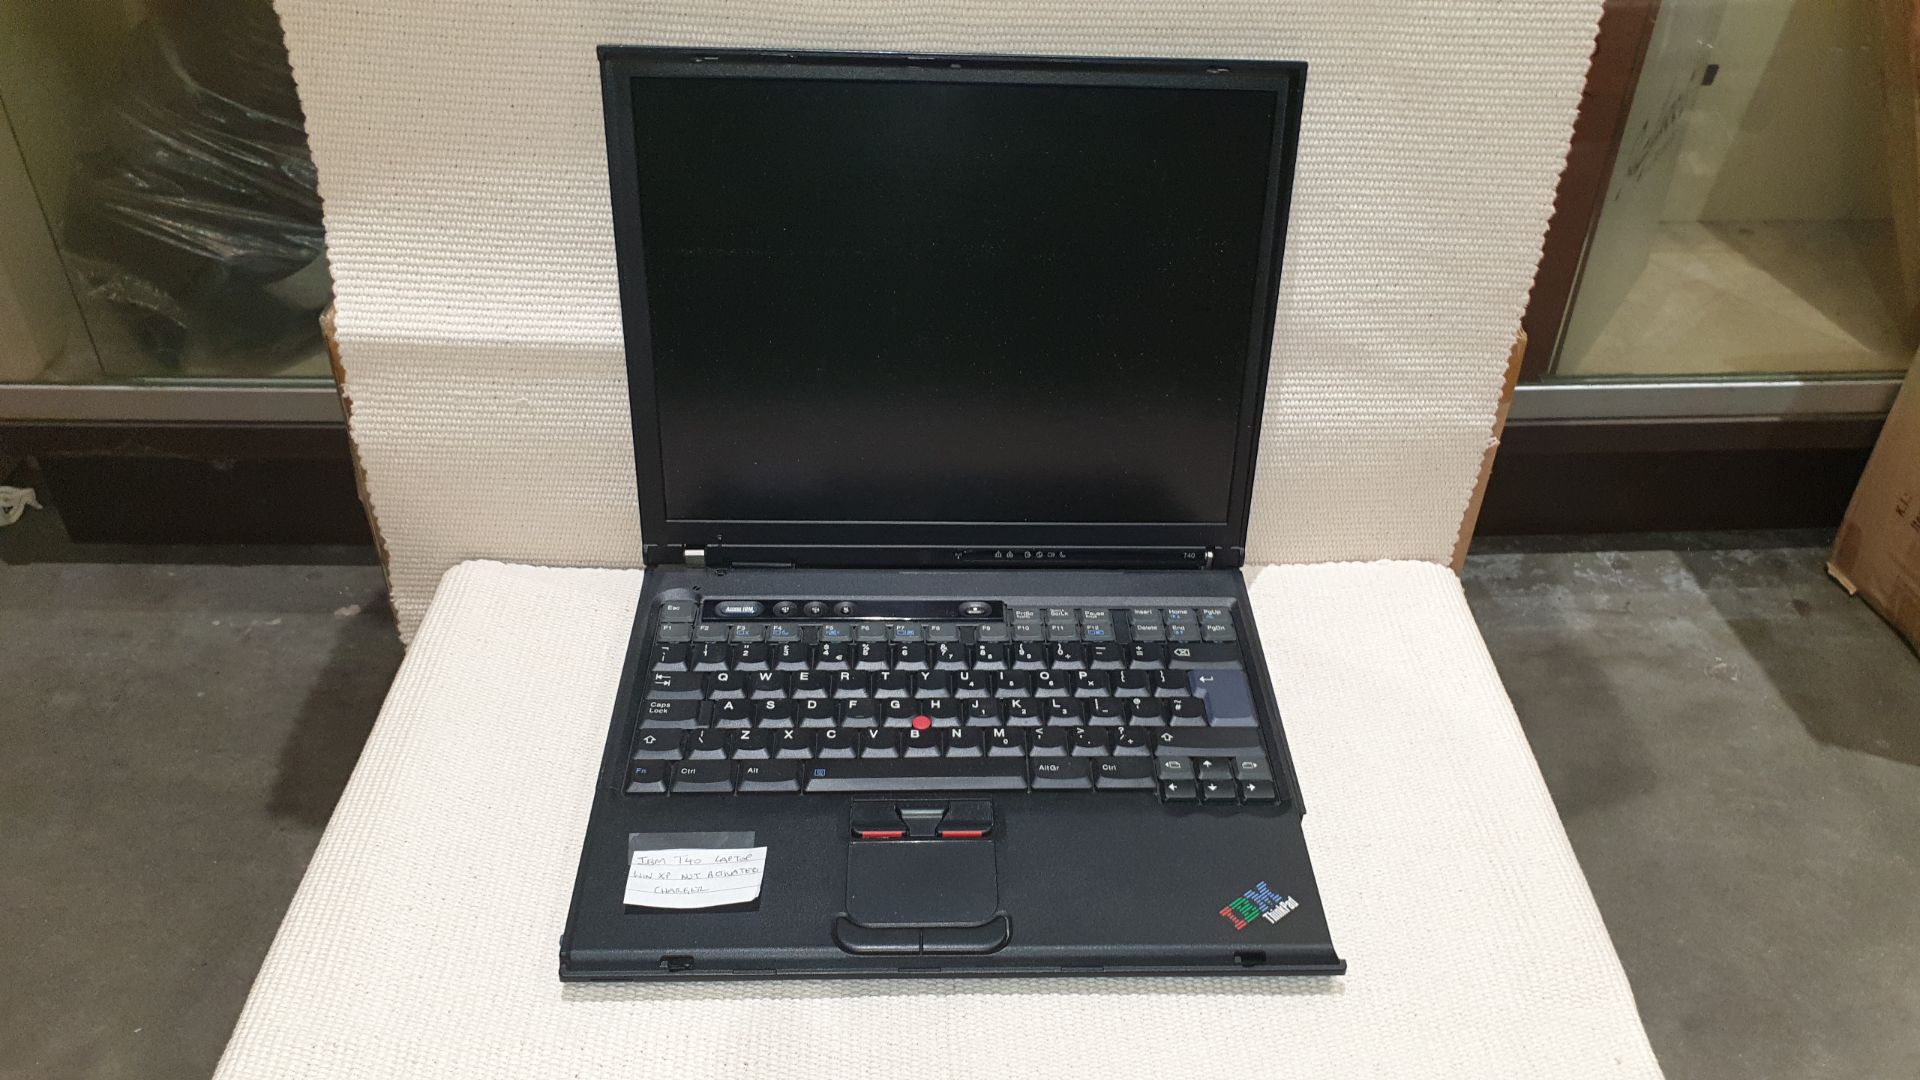 IBM T40 LAPTOP WITH WINDOWS XP NOT ACTIVATED & CHARGER